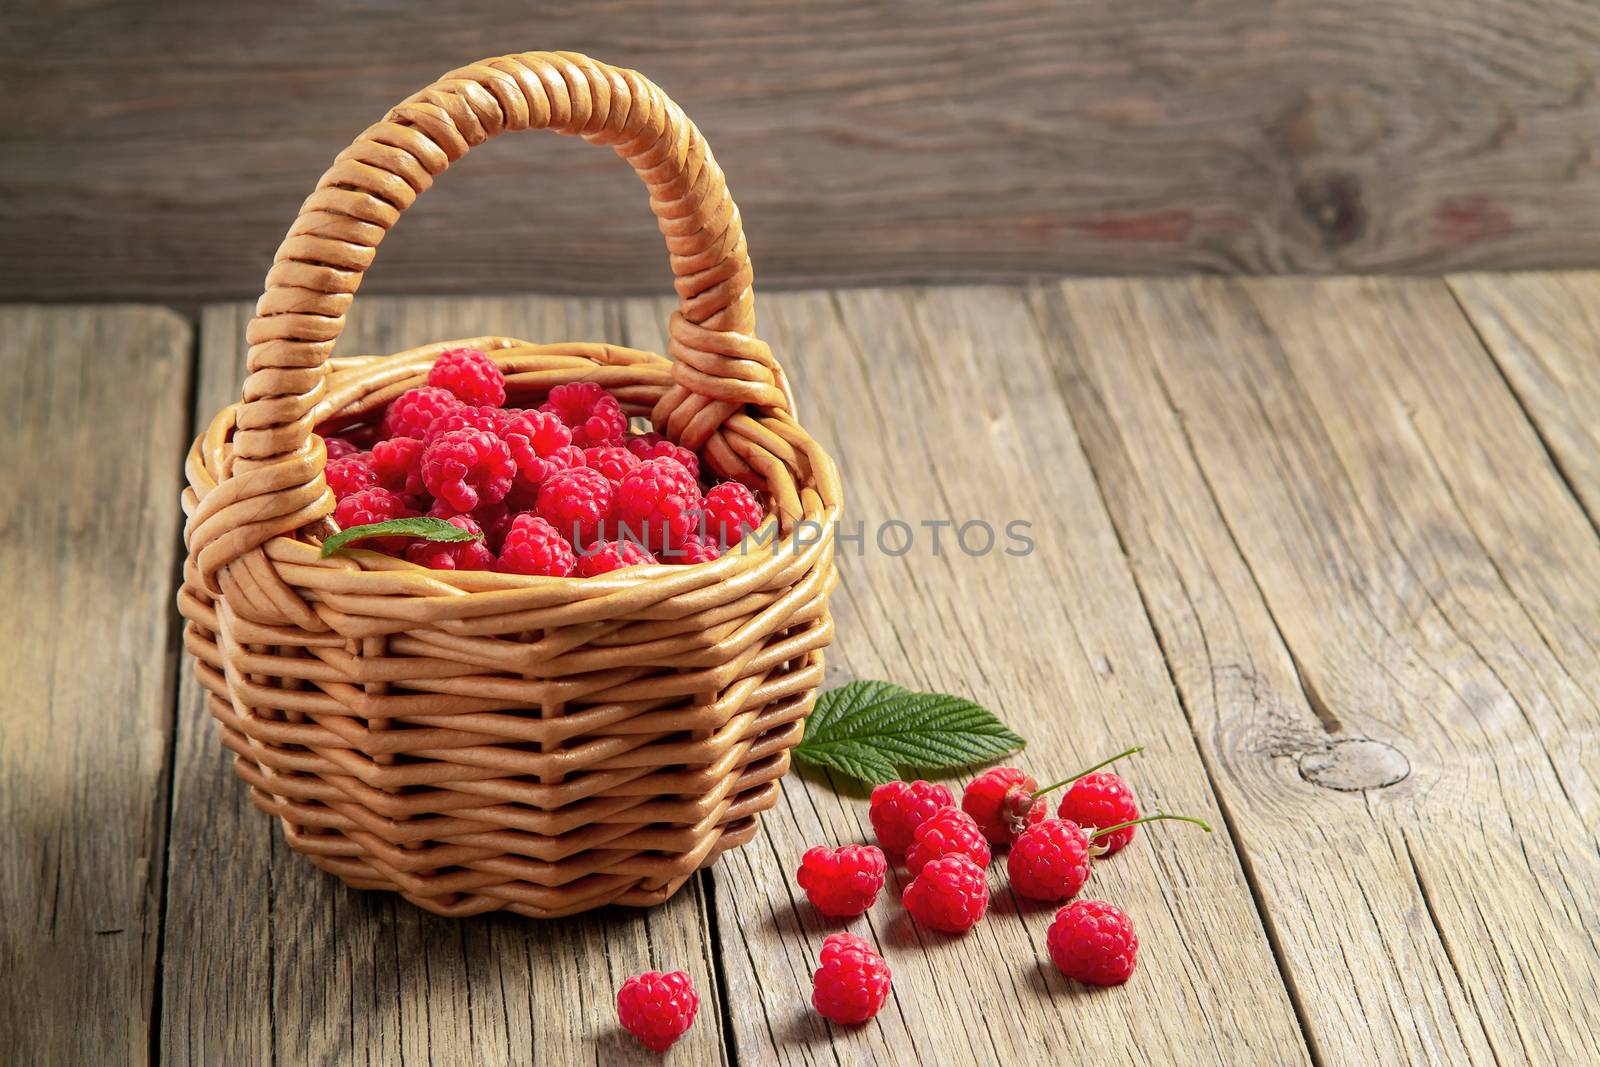 Ripe forest raspberries in a small basket on a wooden table, copy space by galsand